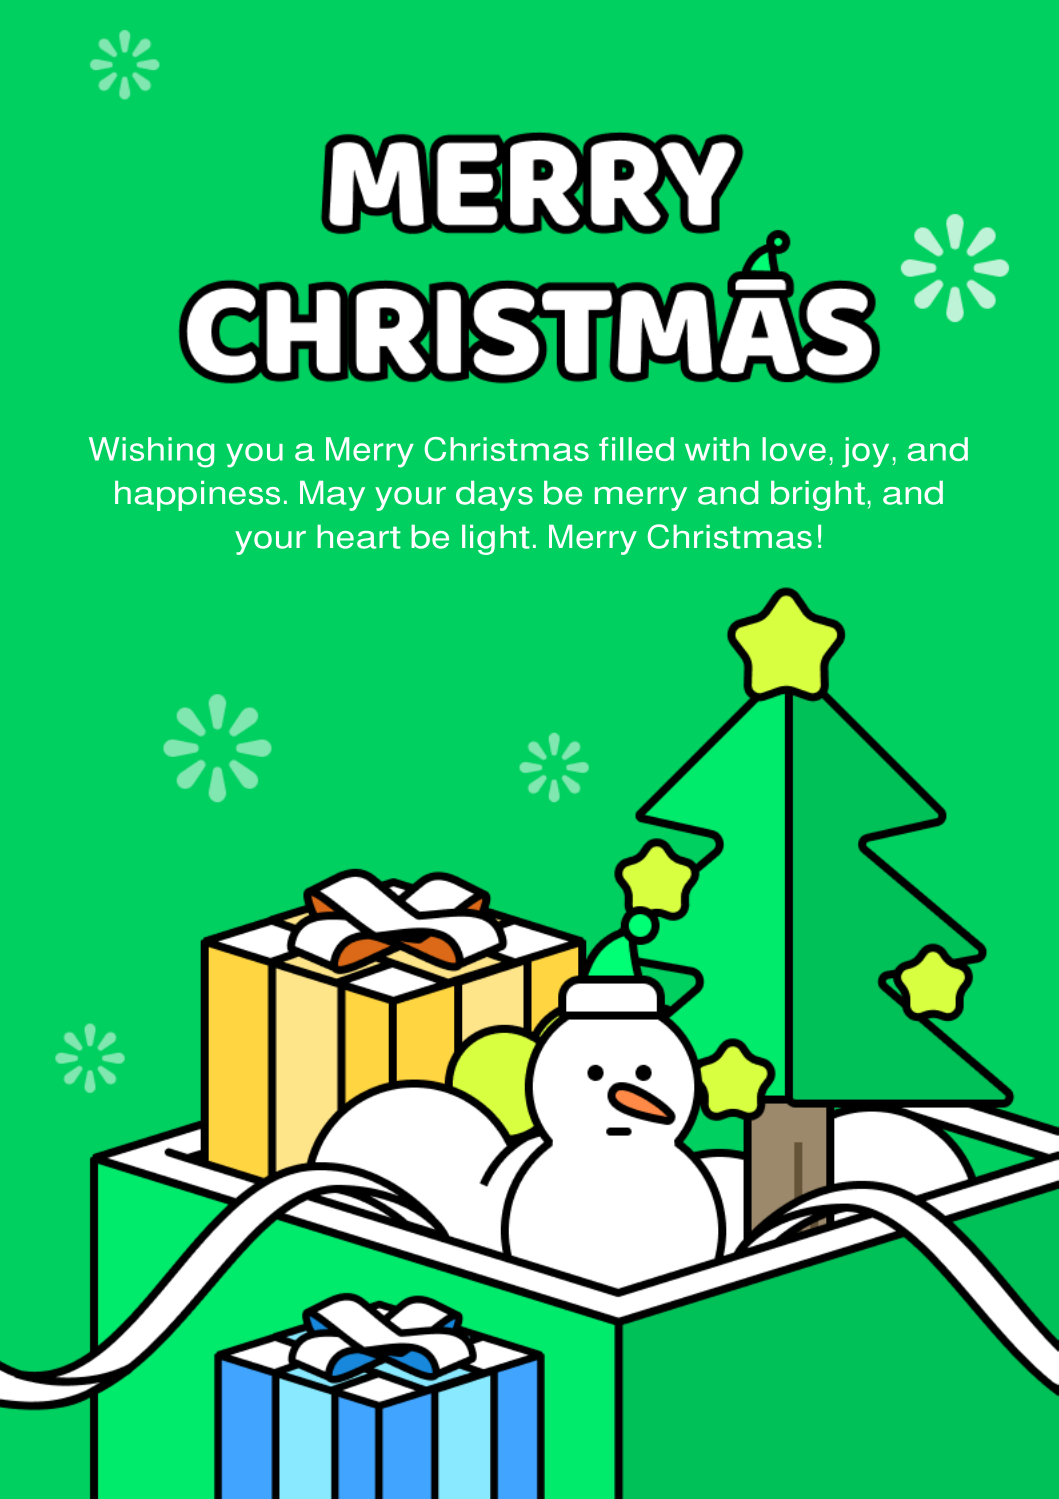 Christmas message for employees